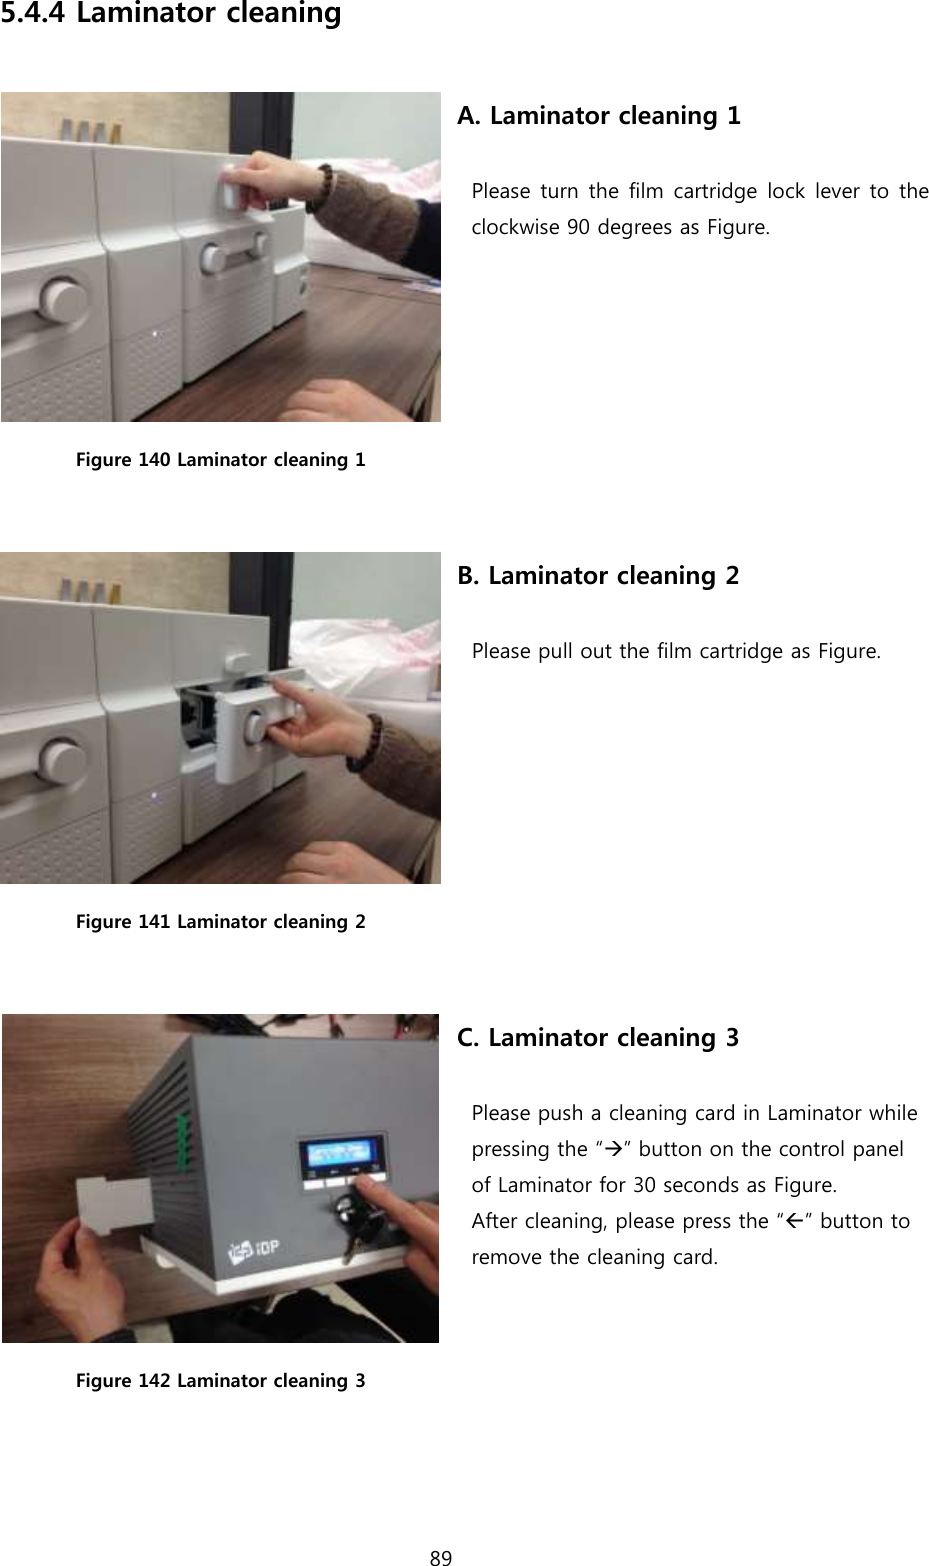 89  5.4.4 Laminator cleaning   Figure 140 Laminator cleaning 1  A. Laminator cleaning 1  Please turn the film cartridge lock lever to the clockwise 90 degrees as Figure.  Figure 141 Laminator cleaning 2  B. Laminator cleaning 2  Please pull out the film cartridge as Figure.  Figure 142 Laminator cleaning 3 C. Laminator cleaning 3  Please push a cleaning card in Laminator while pressing the “” button on the control panel   of Laminator for 30 seconds as Figure.   After cleaning, please press the “” button to   remove the cleaning card.     